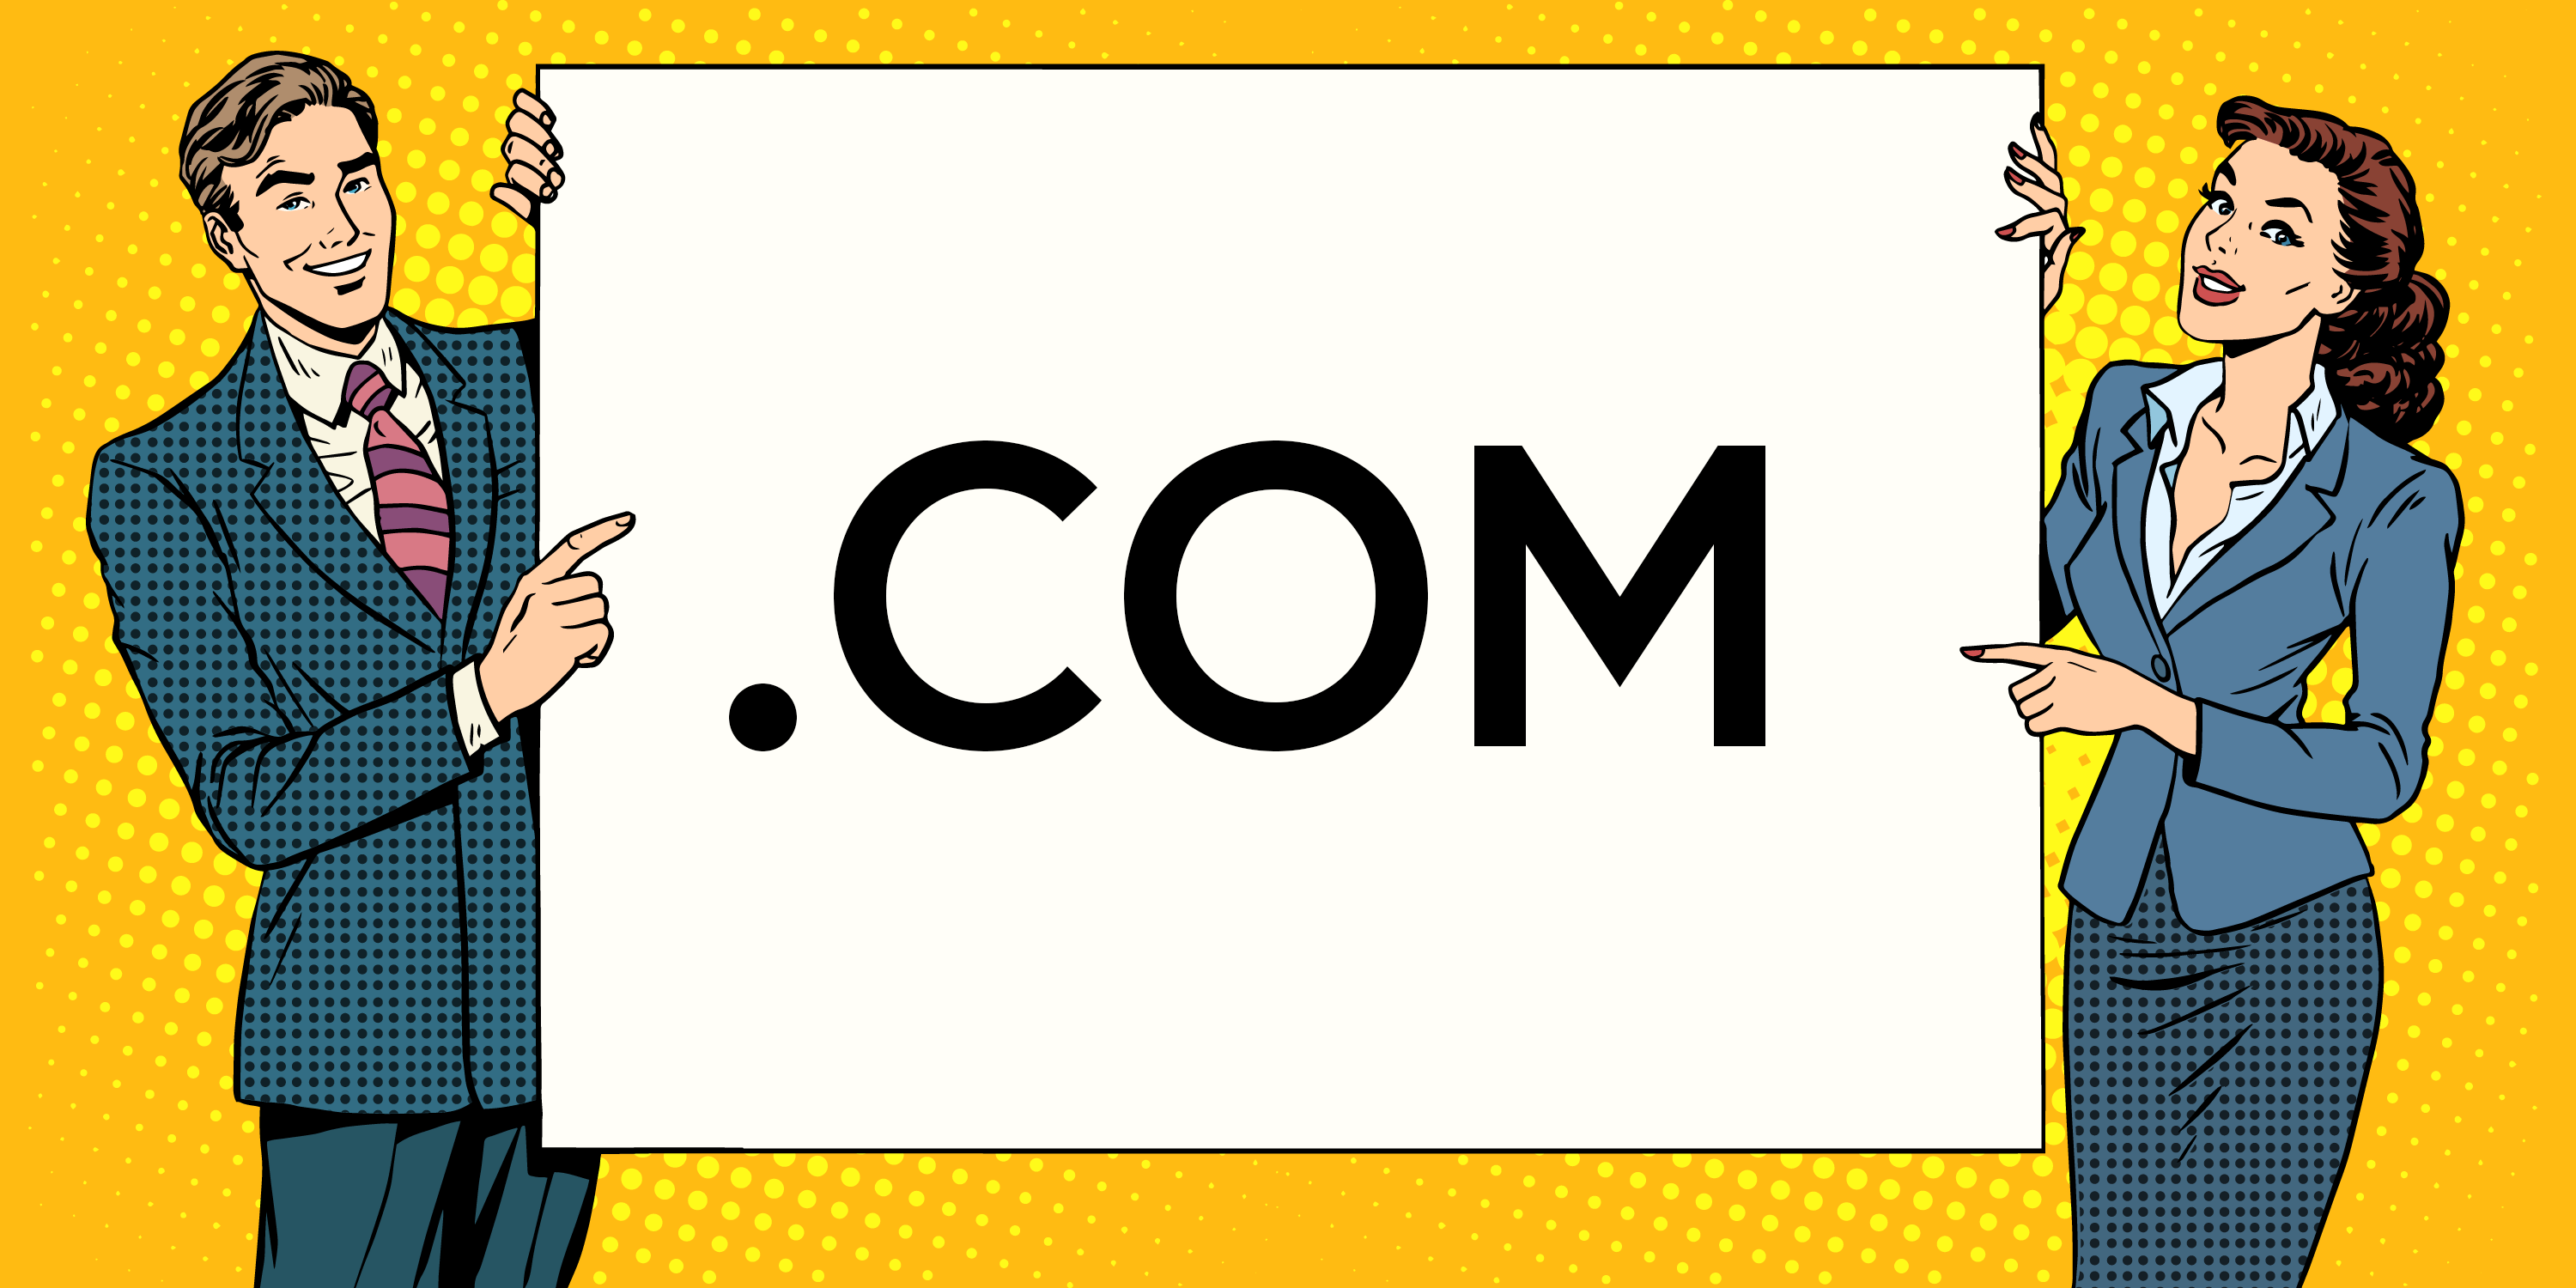 The .COM brand is so strong, it expands beyond domain names